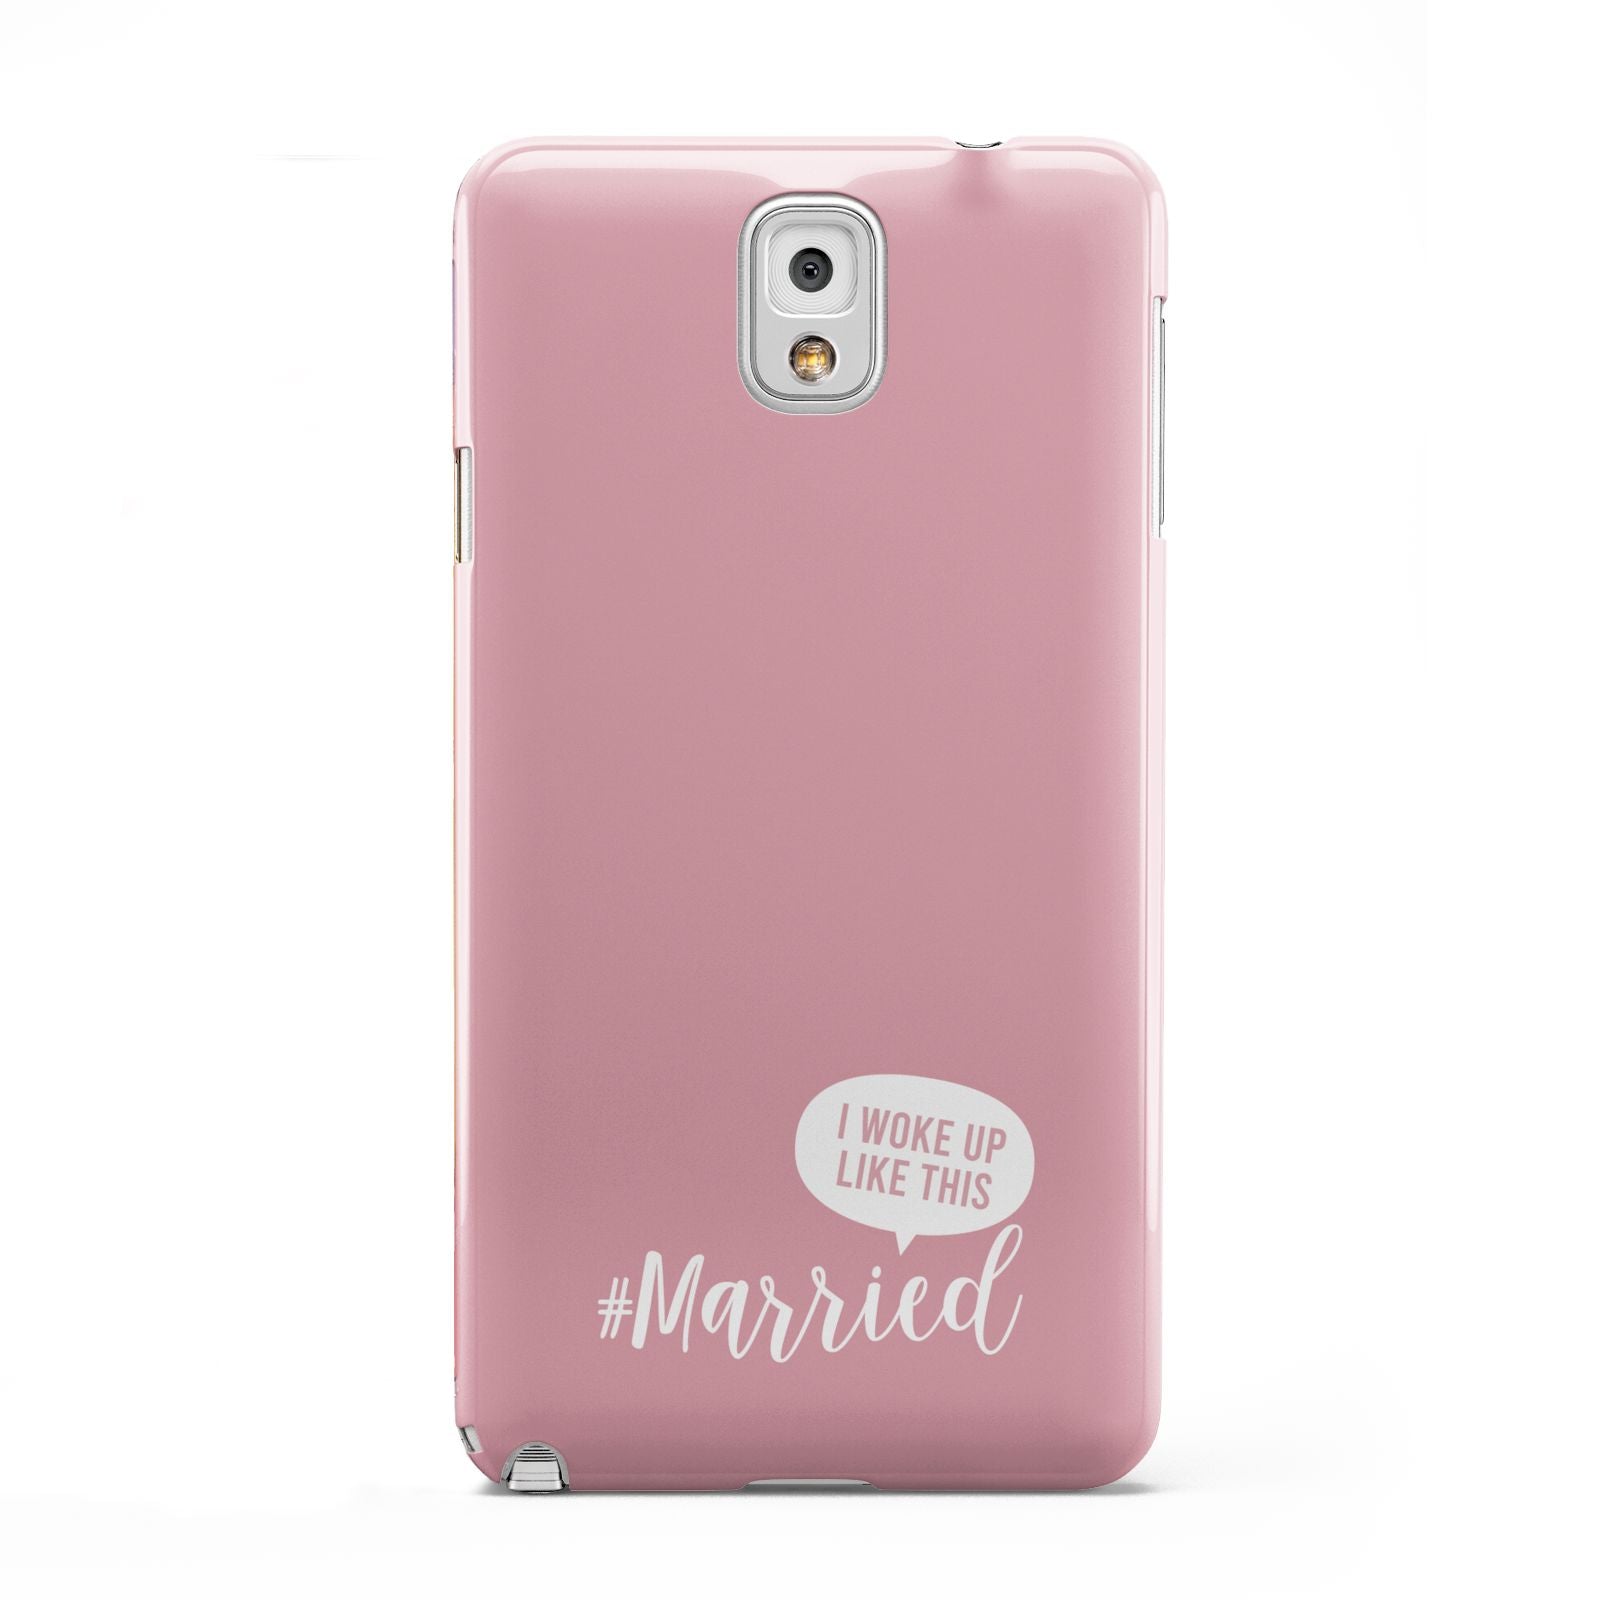 I Woke Up Like This Married Samsung Galaxy Note 3 Case